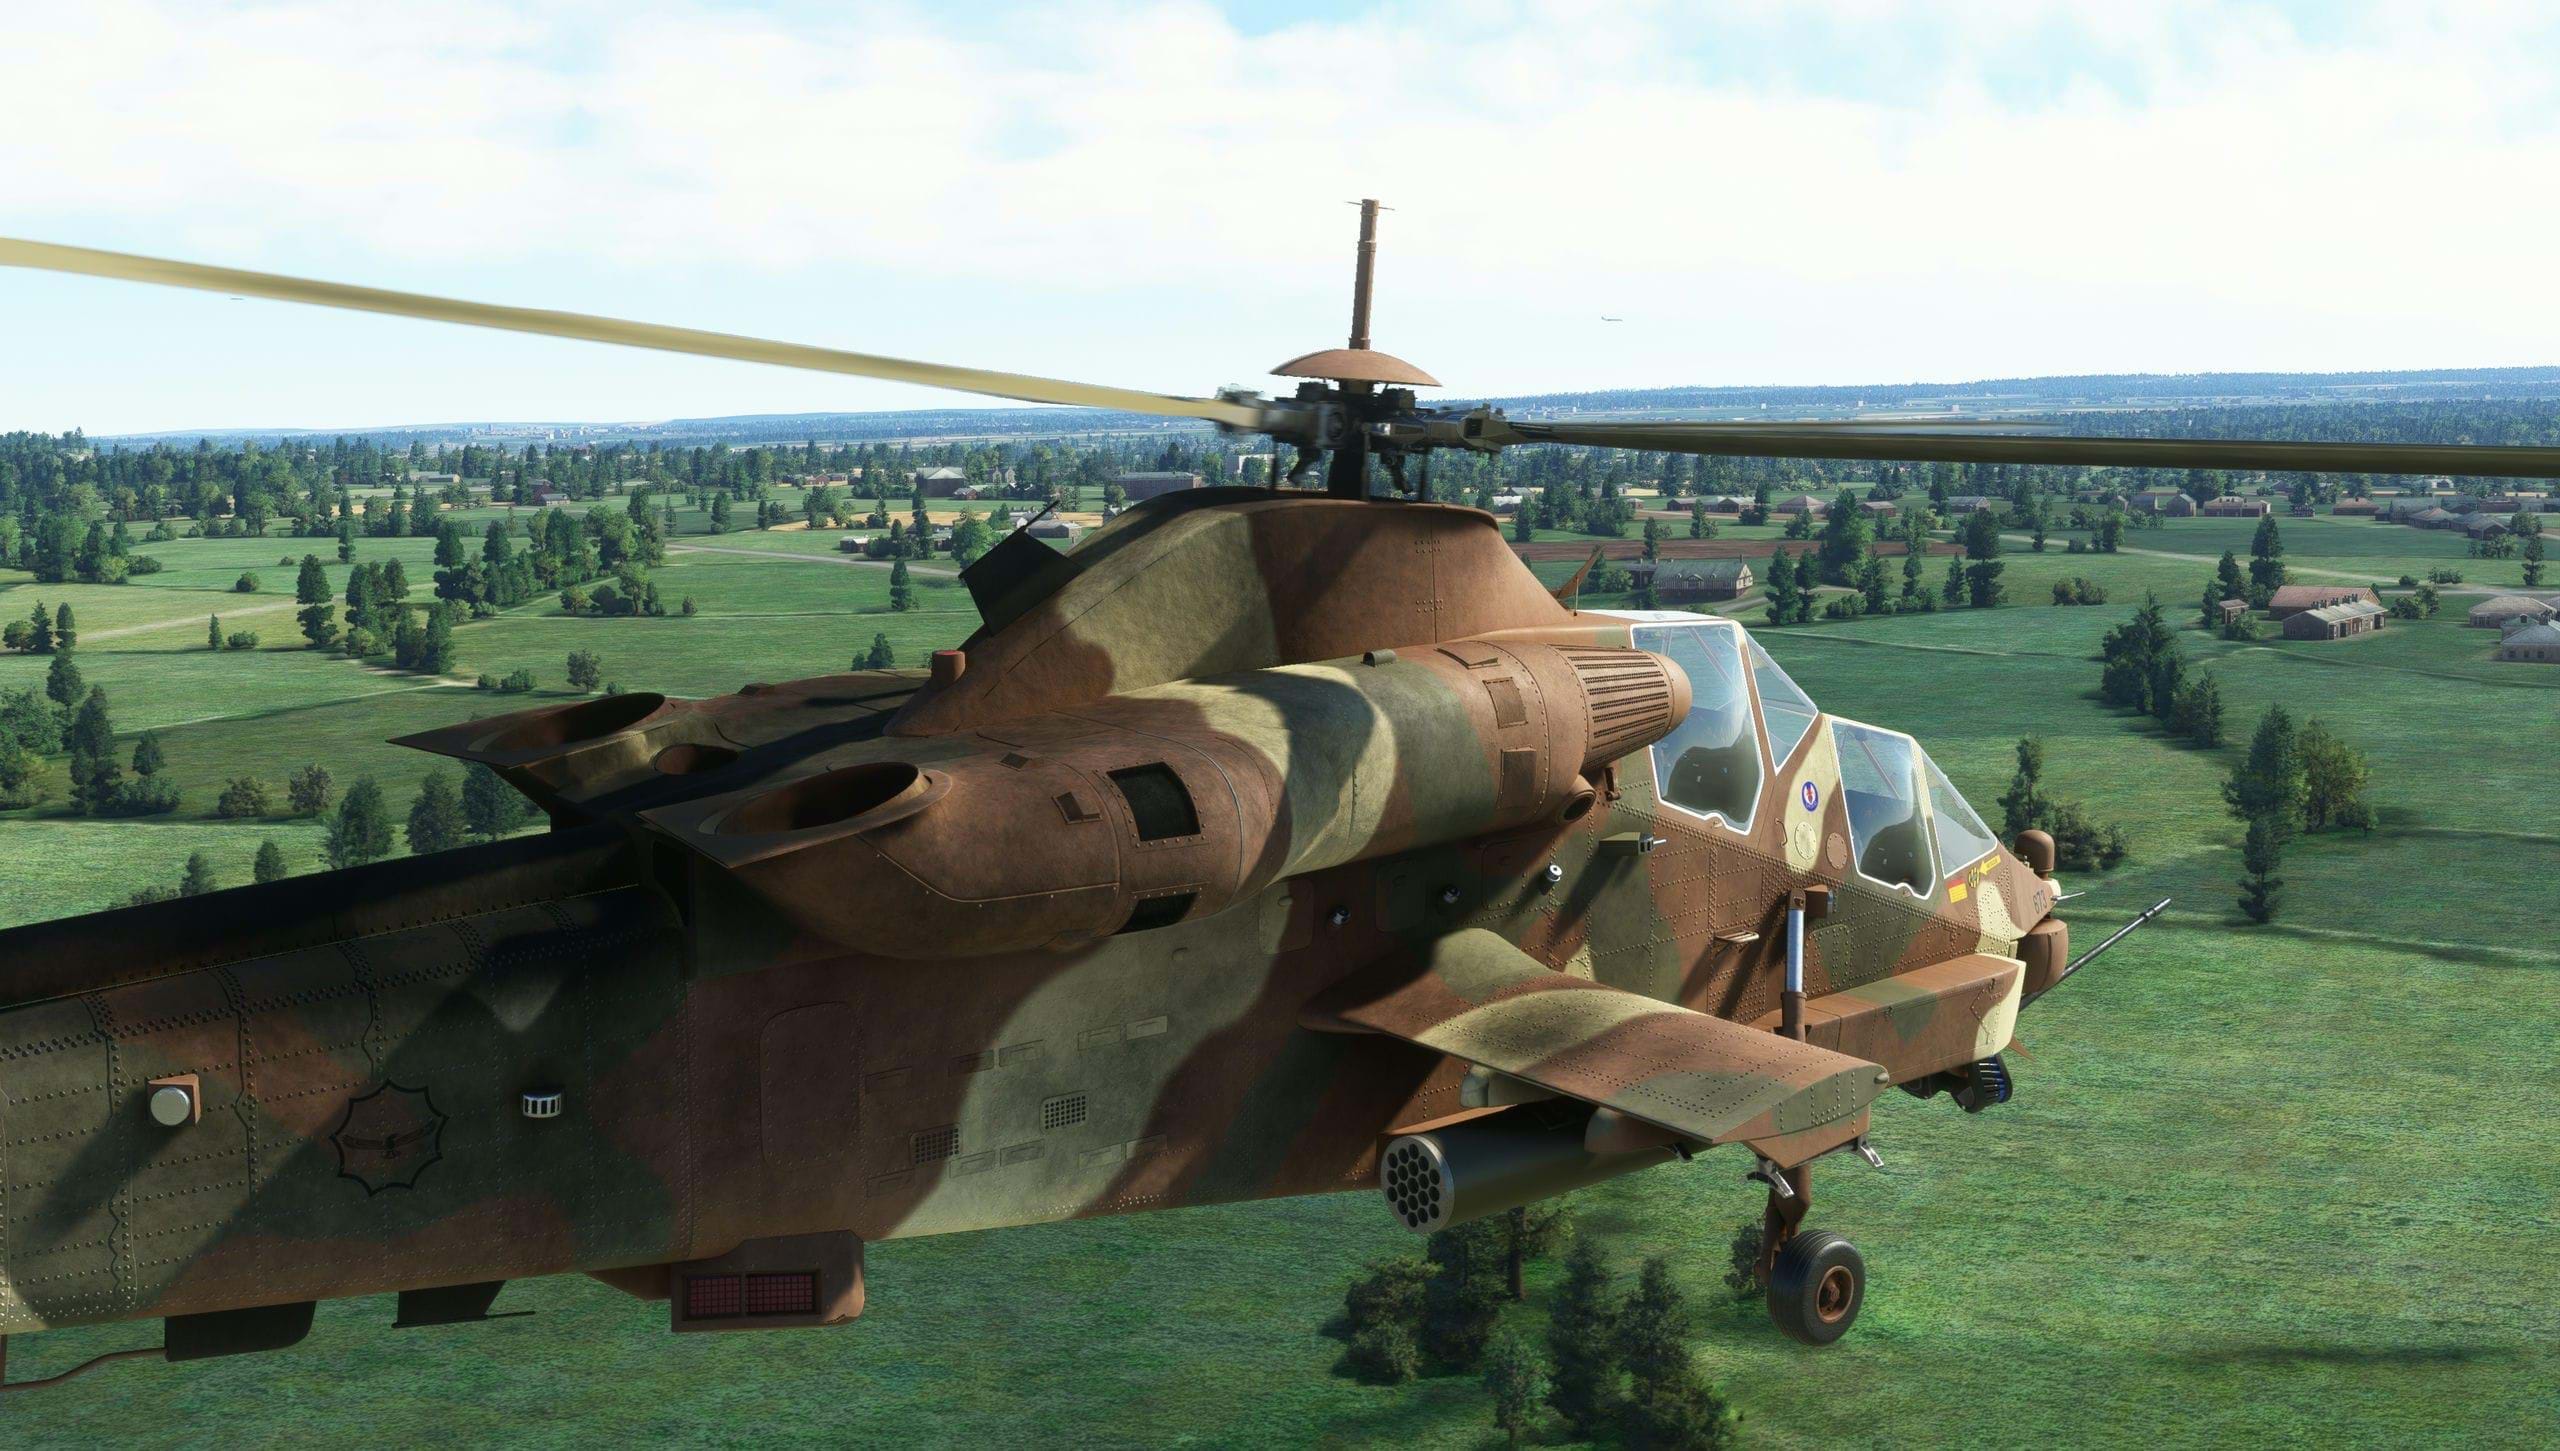 ARMA REFORGER 1.0 UPDATE - HELICOPTERS & SO MUCH MORE